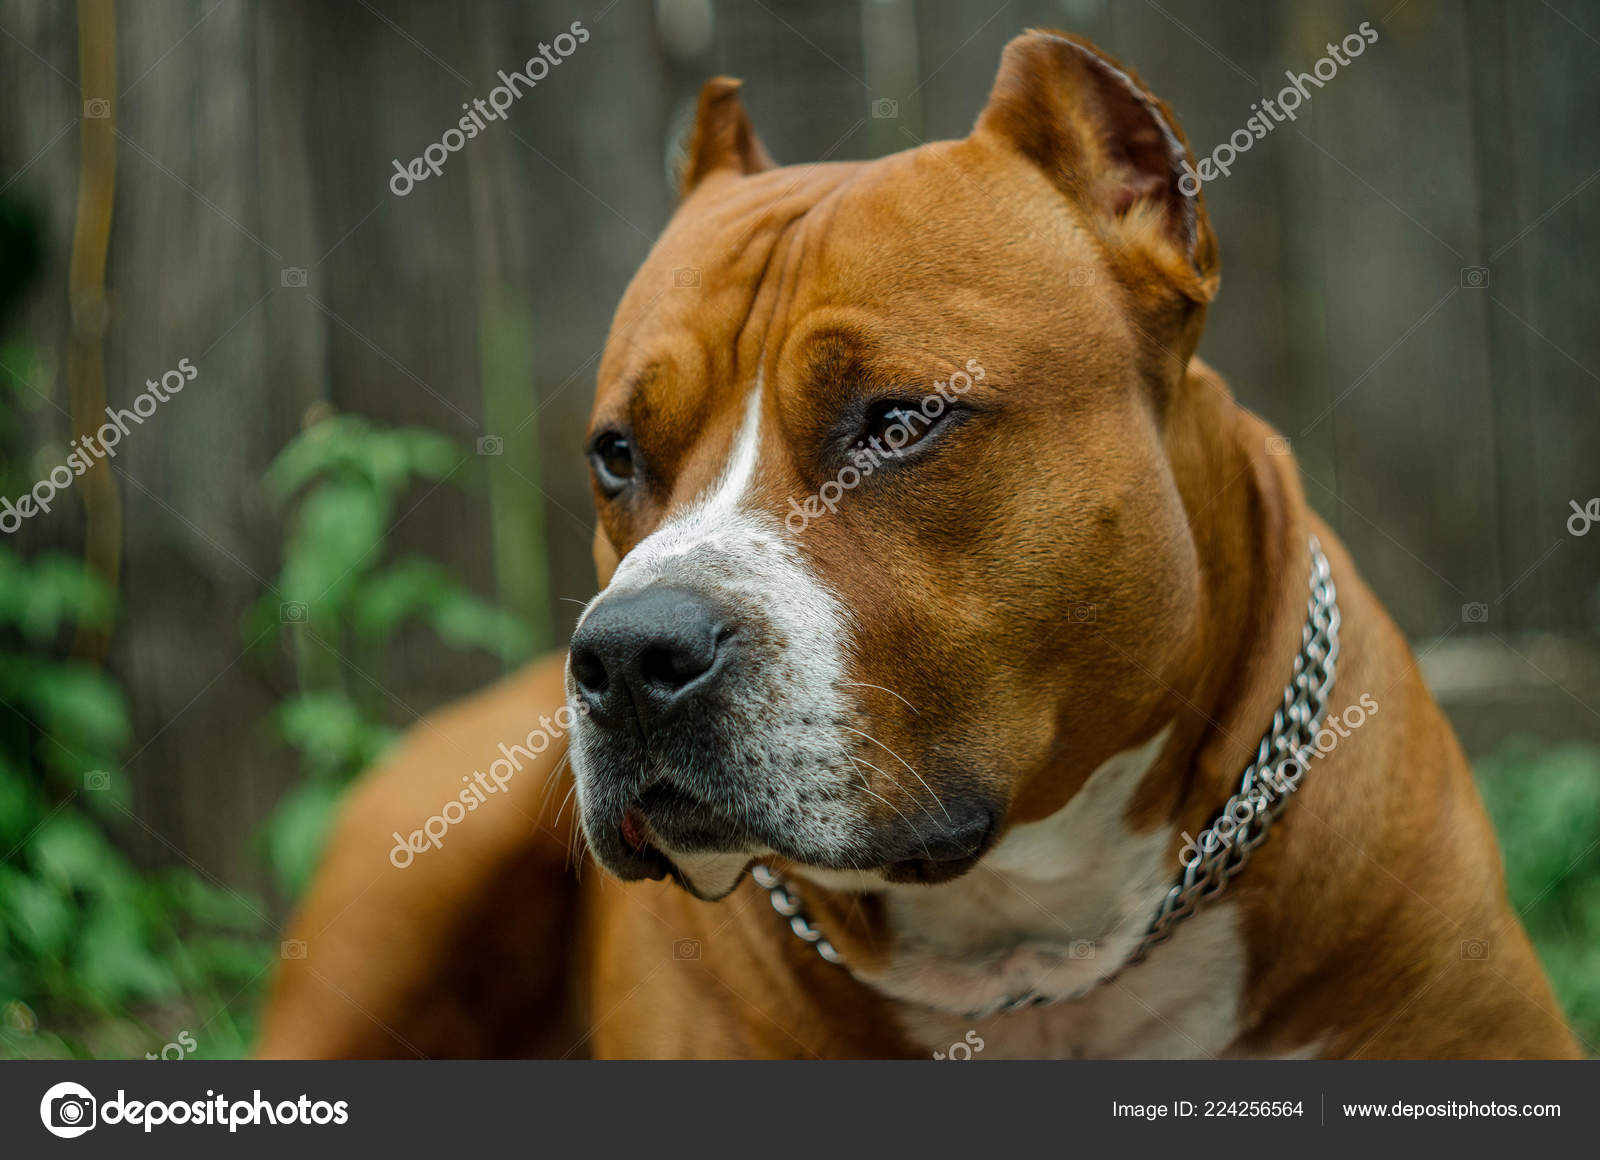 red american staffordshire terrier